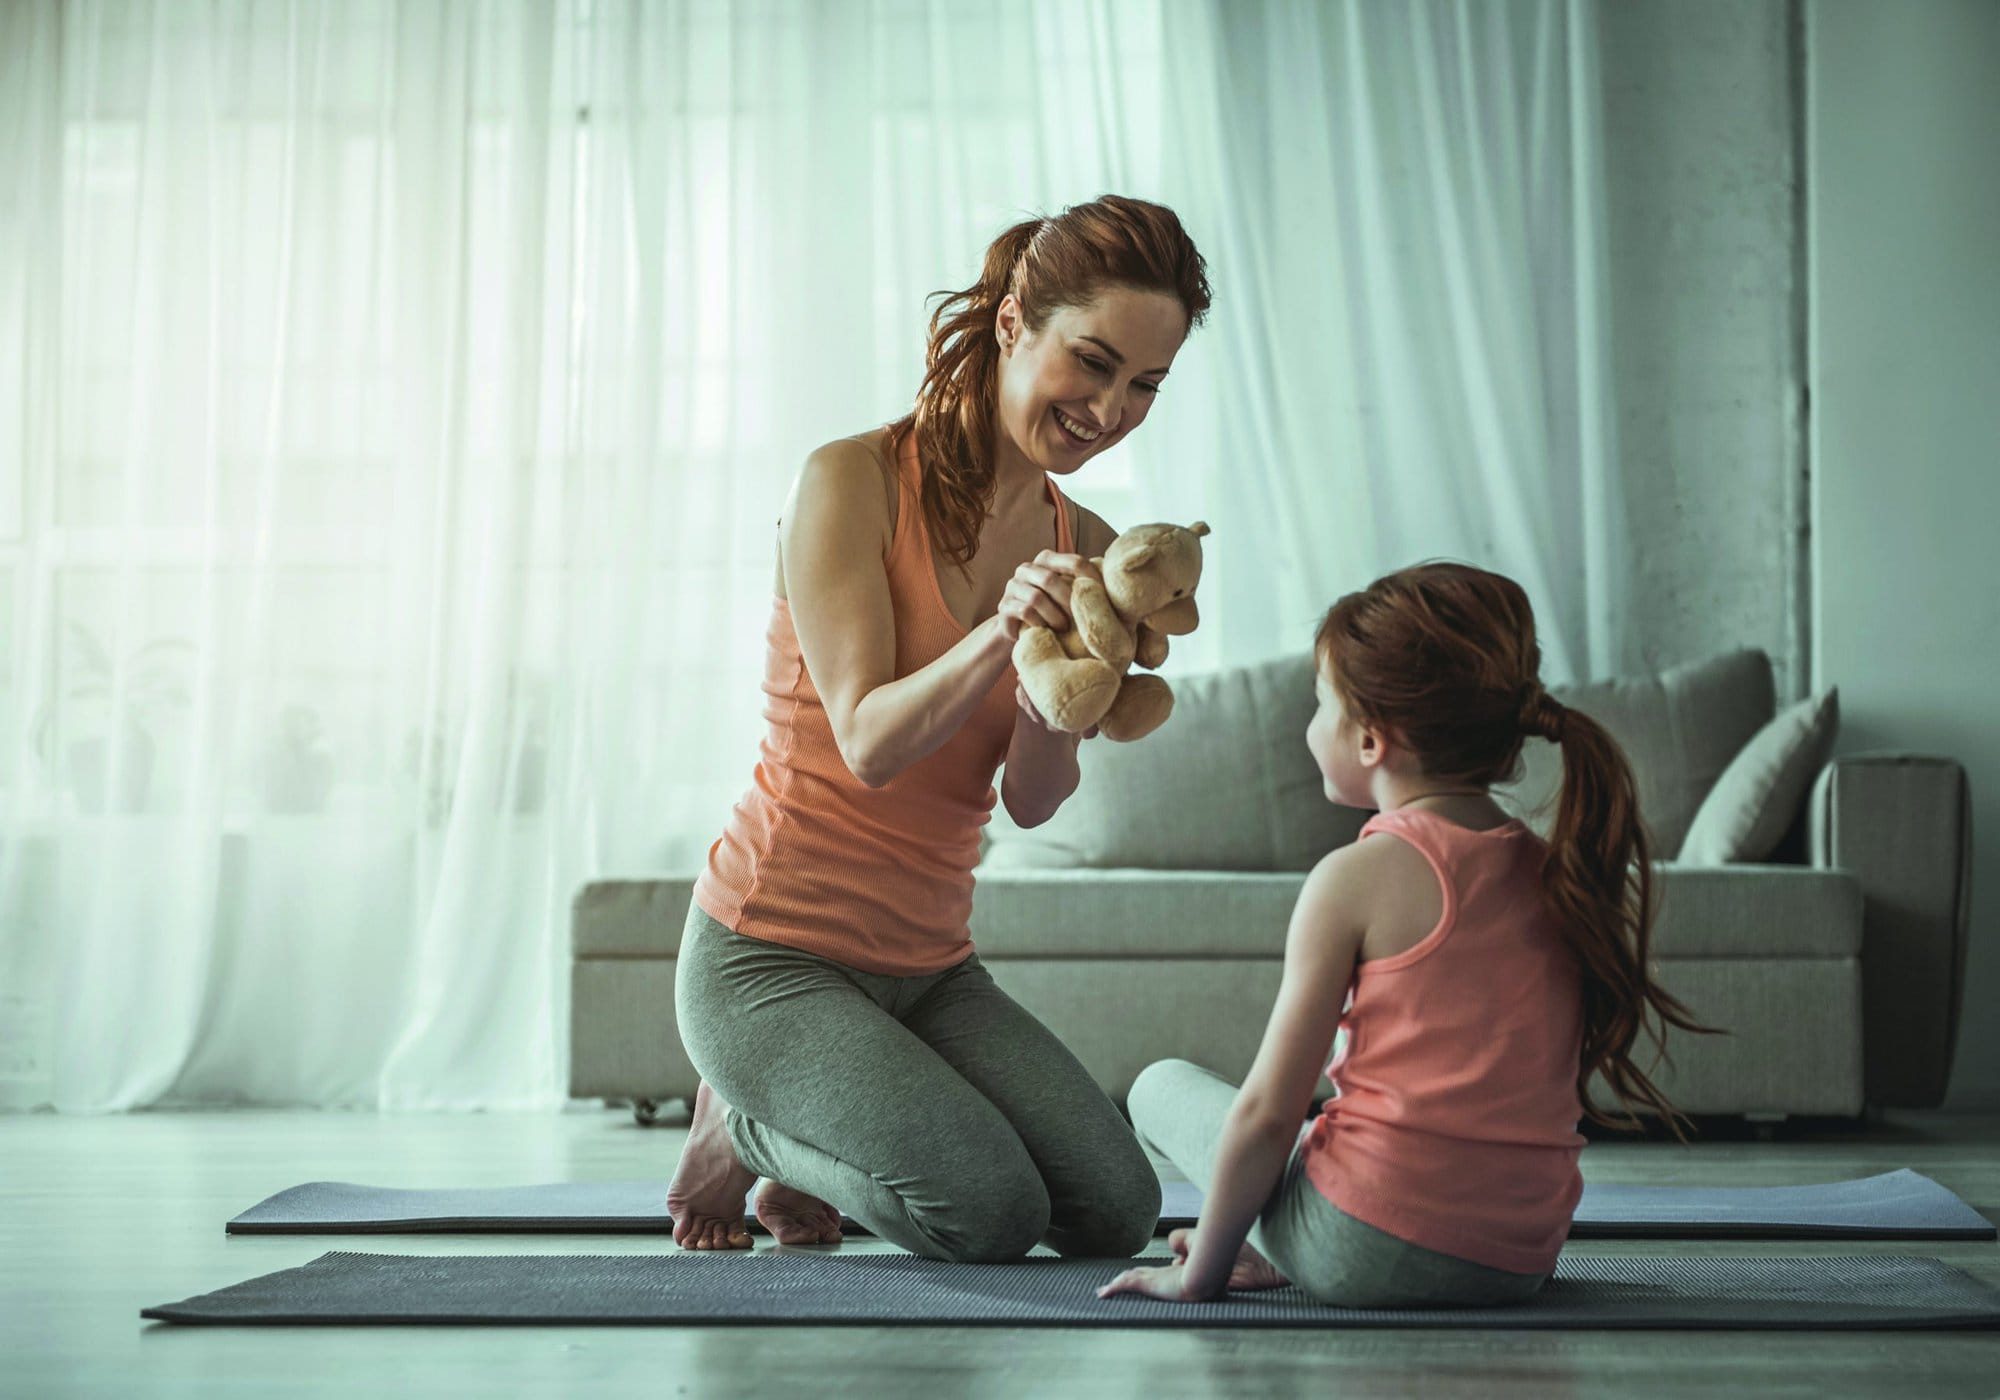 Fun time. Full length portrait of woman and child sitting on floor. Mom is holding teddy bear in her hands and jocosely smiling. Copy space in left side